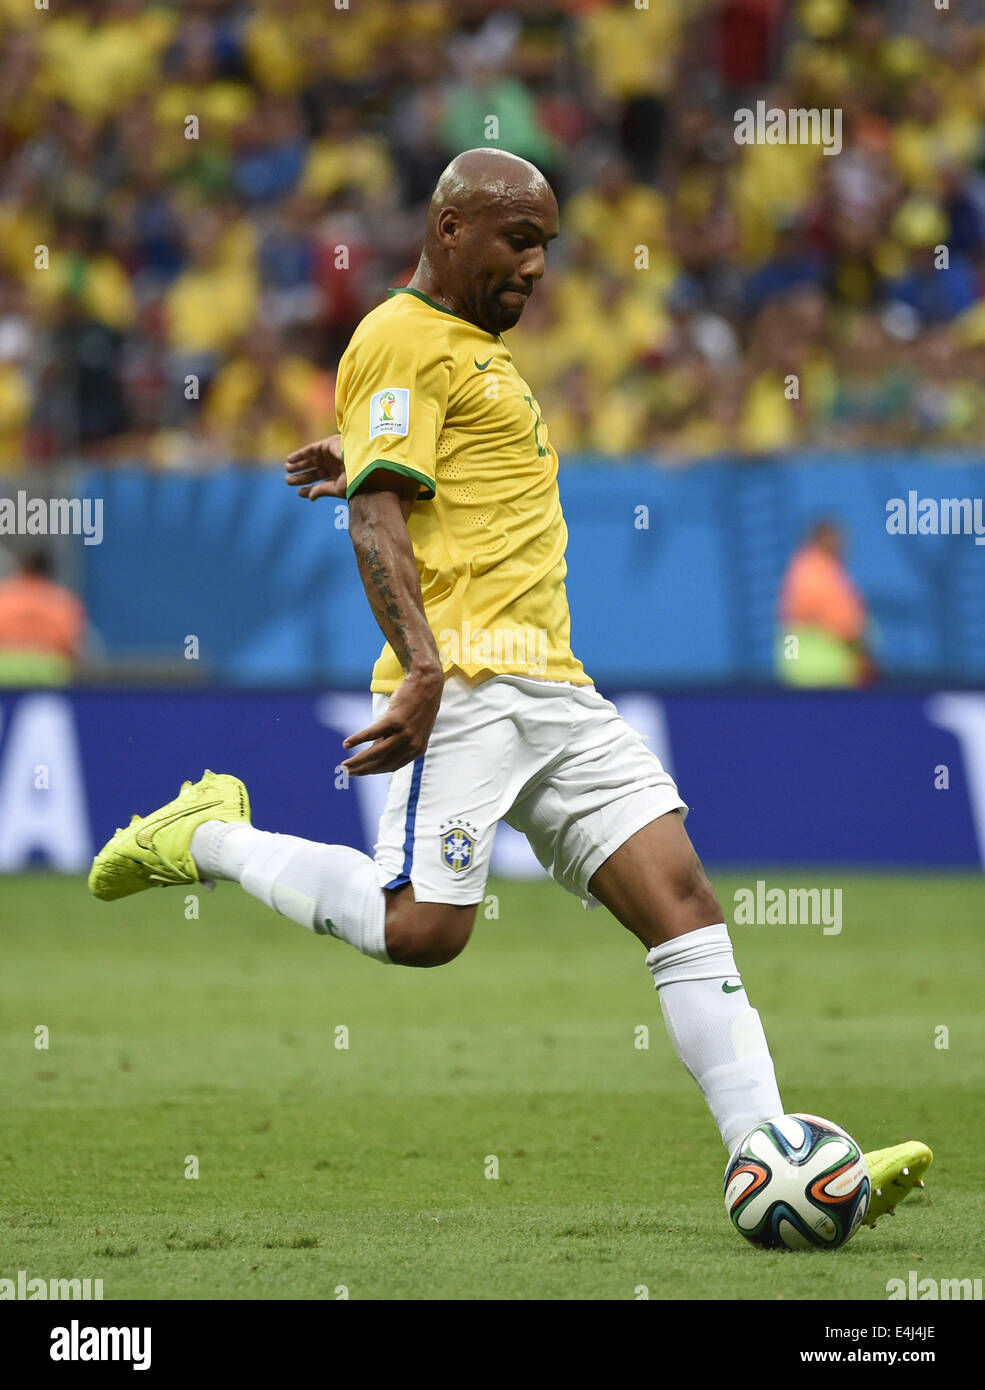 Brasilia, Brazil. 12th July, 2014. Brazil's Maicon passes the ball during the third place play-off match between Brazil and Netherlands of 2014 FIFA World Cup at the Estadio Nacional Stadium in Brasilia, Brazil, on July 12, 2014. Credit:  Yang Lei/Xinhua/Alamy Live News Stock Photo